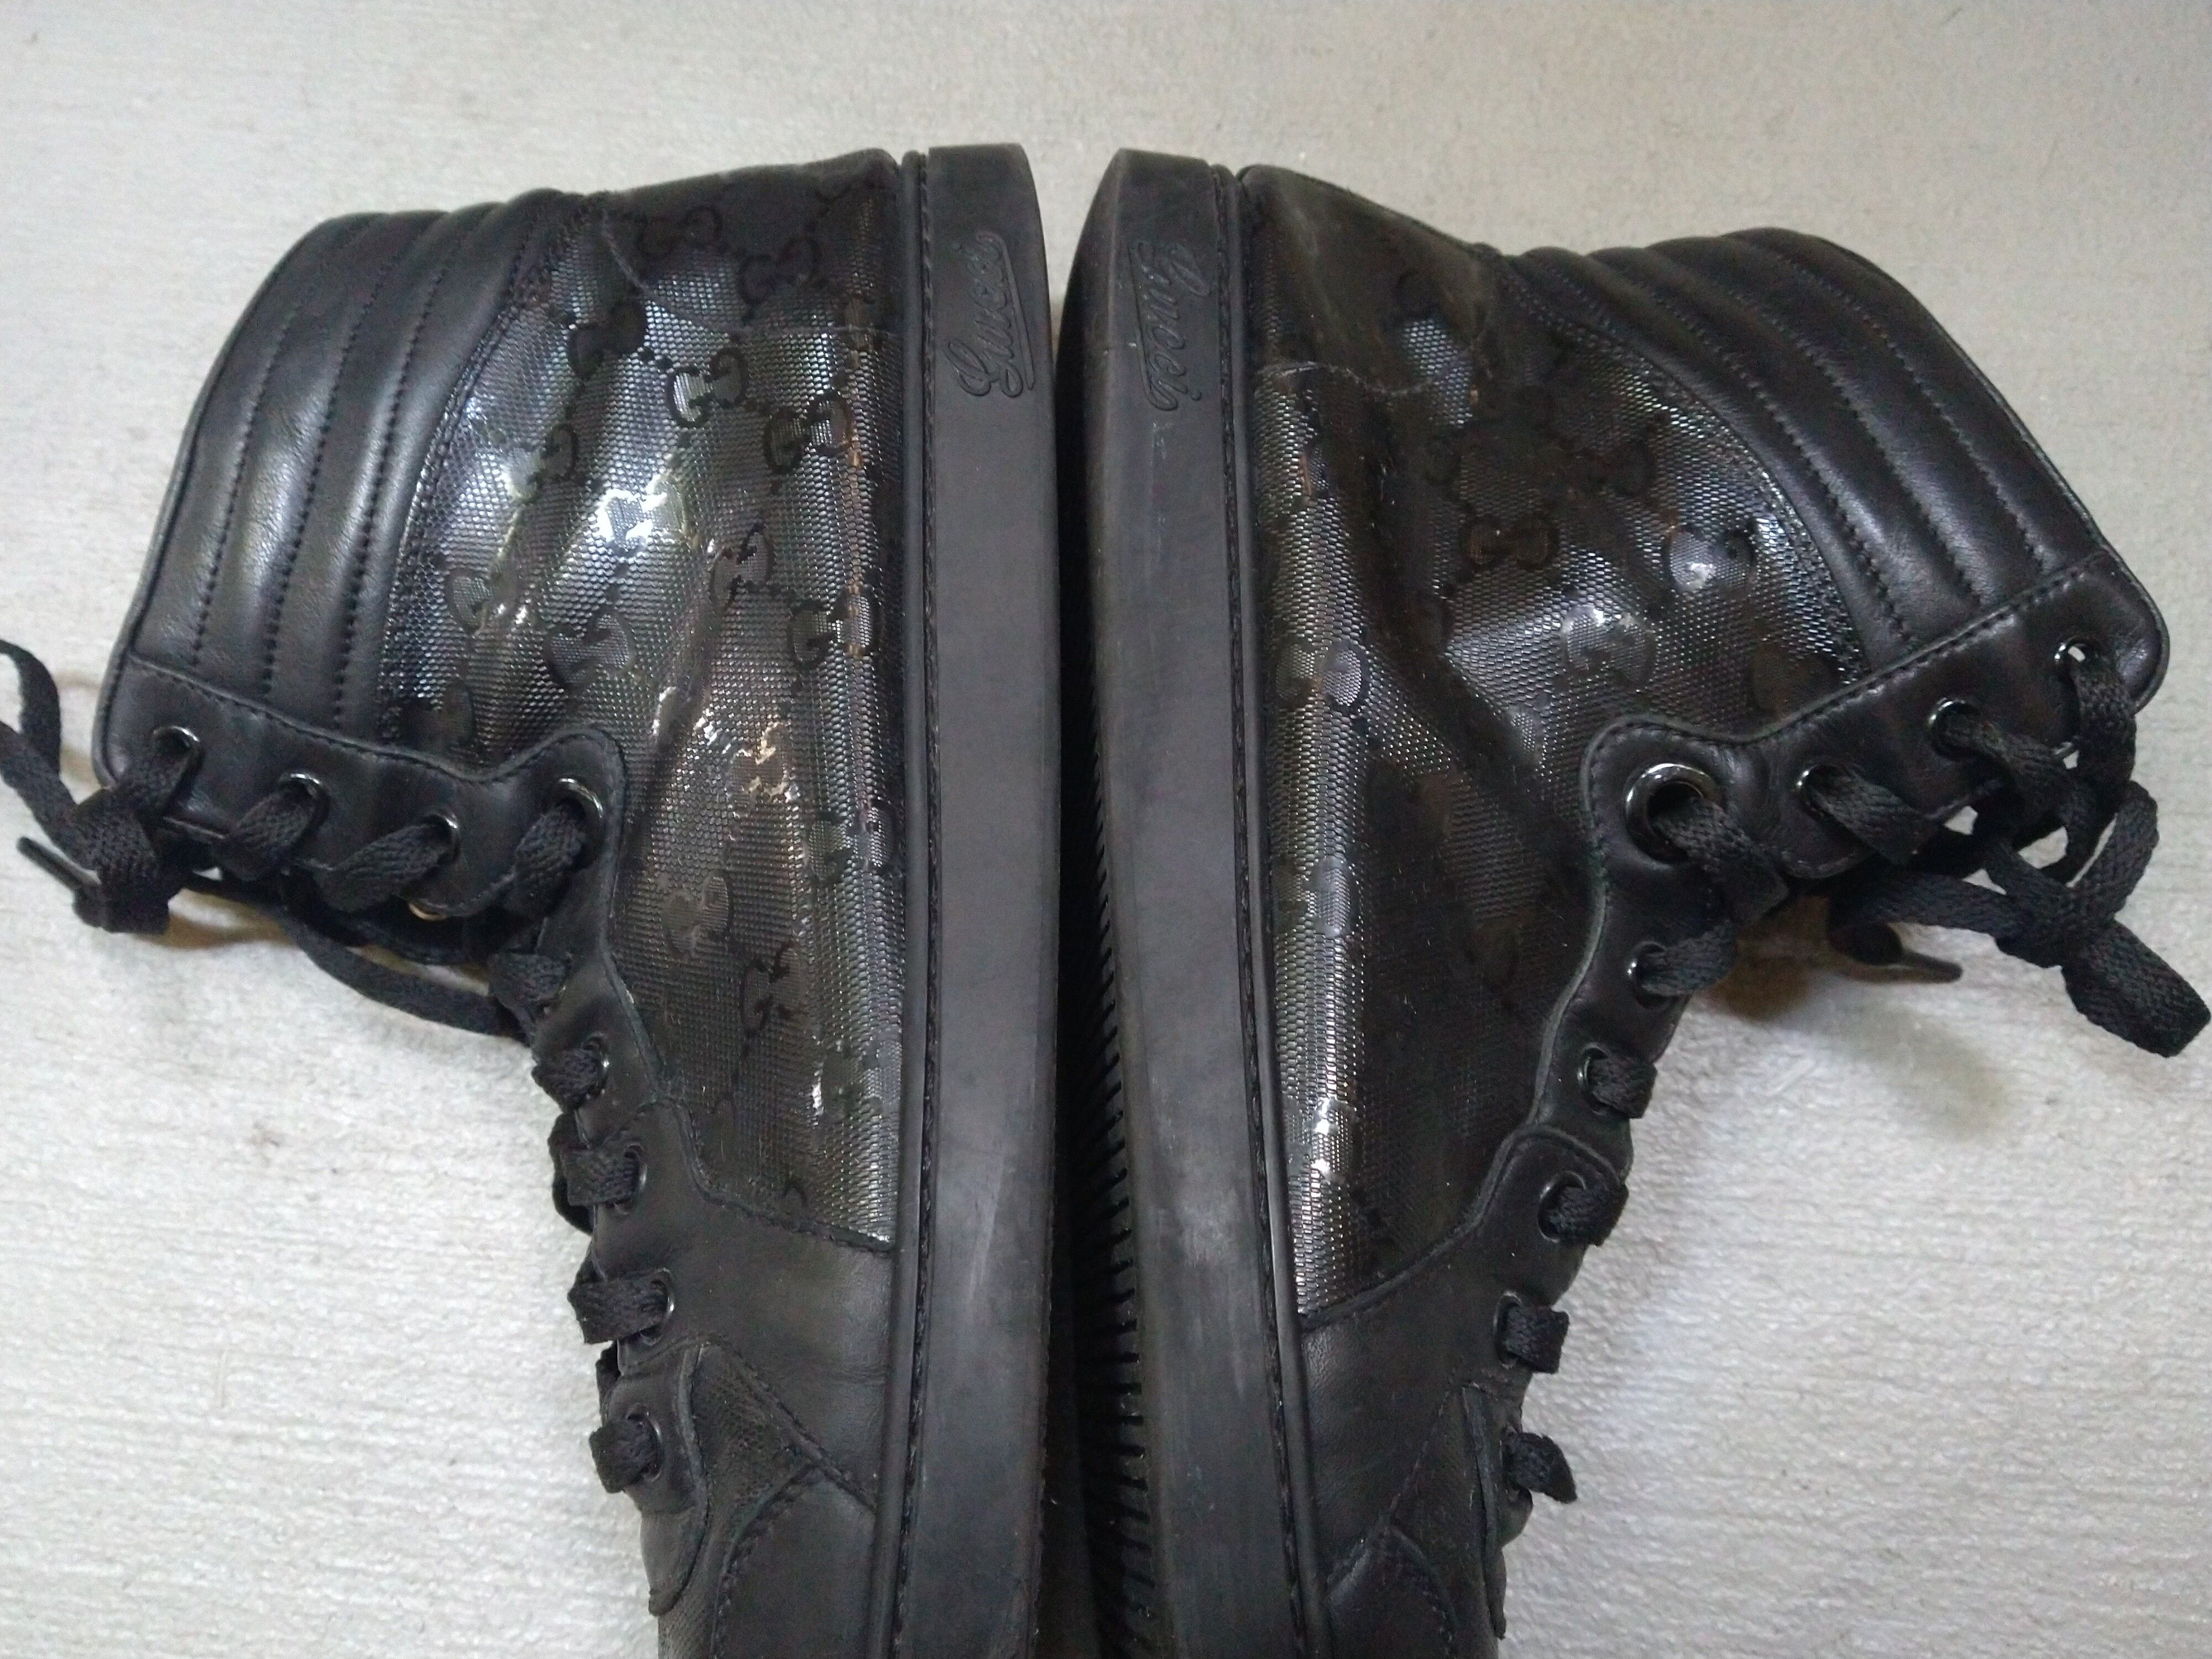 Gucci Gucci High Top Sneakers Black Leather Size 11 Lace Up Size US 11 / EU 44 - 5 Thumbnail